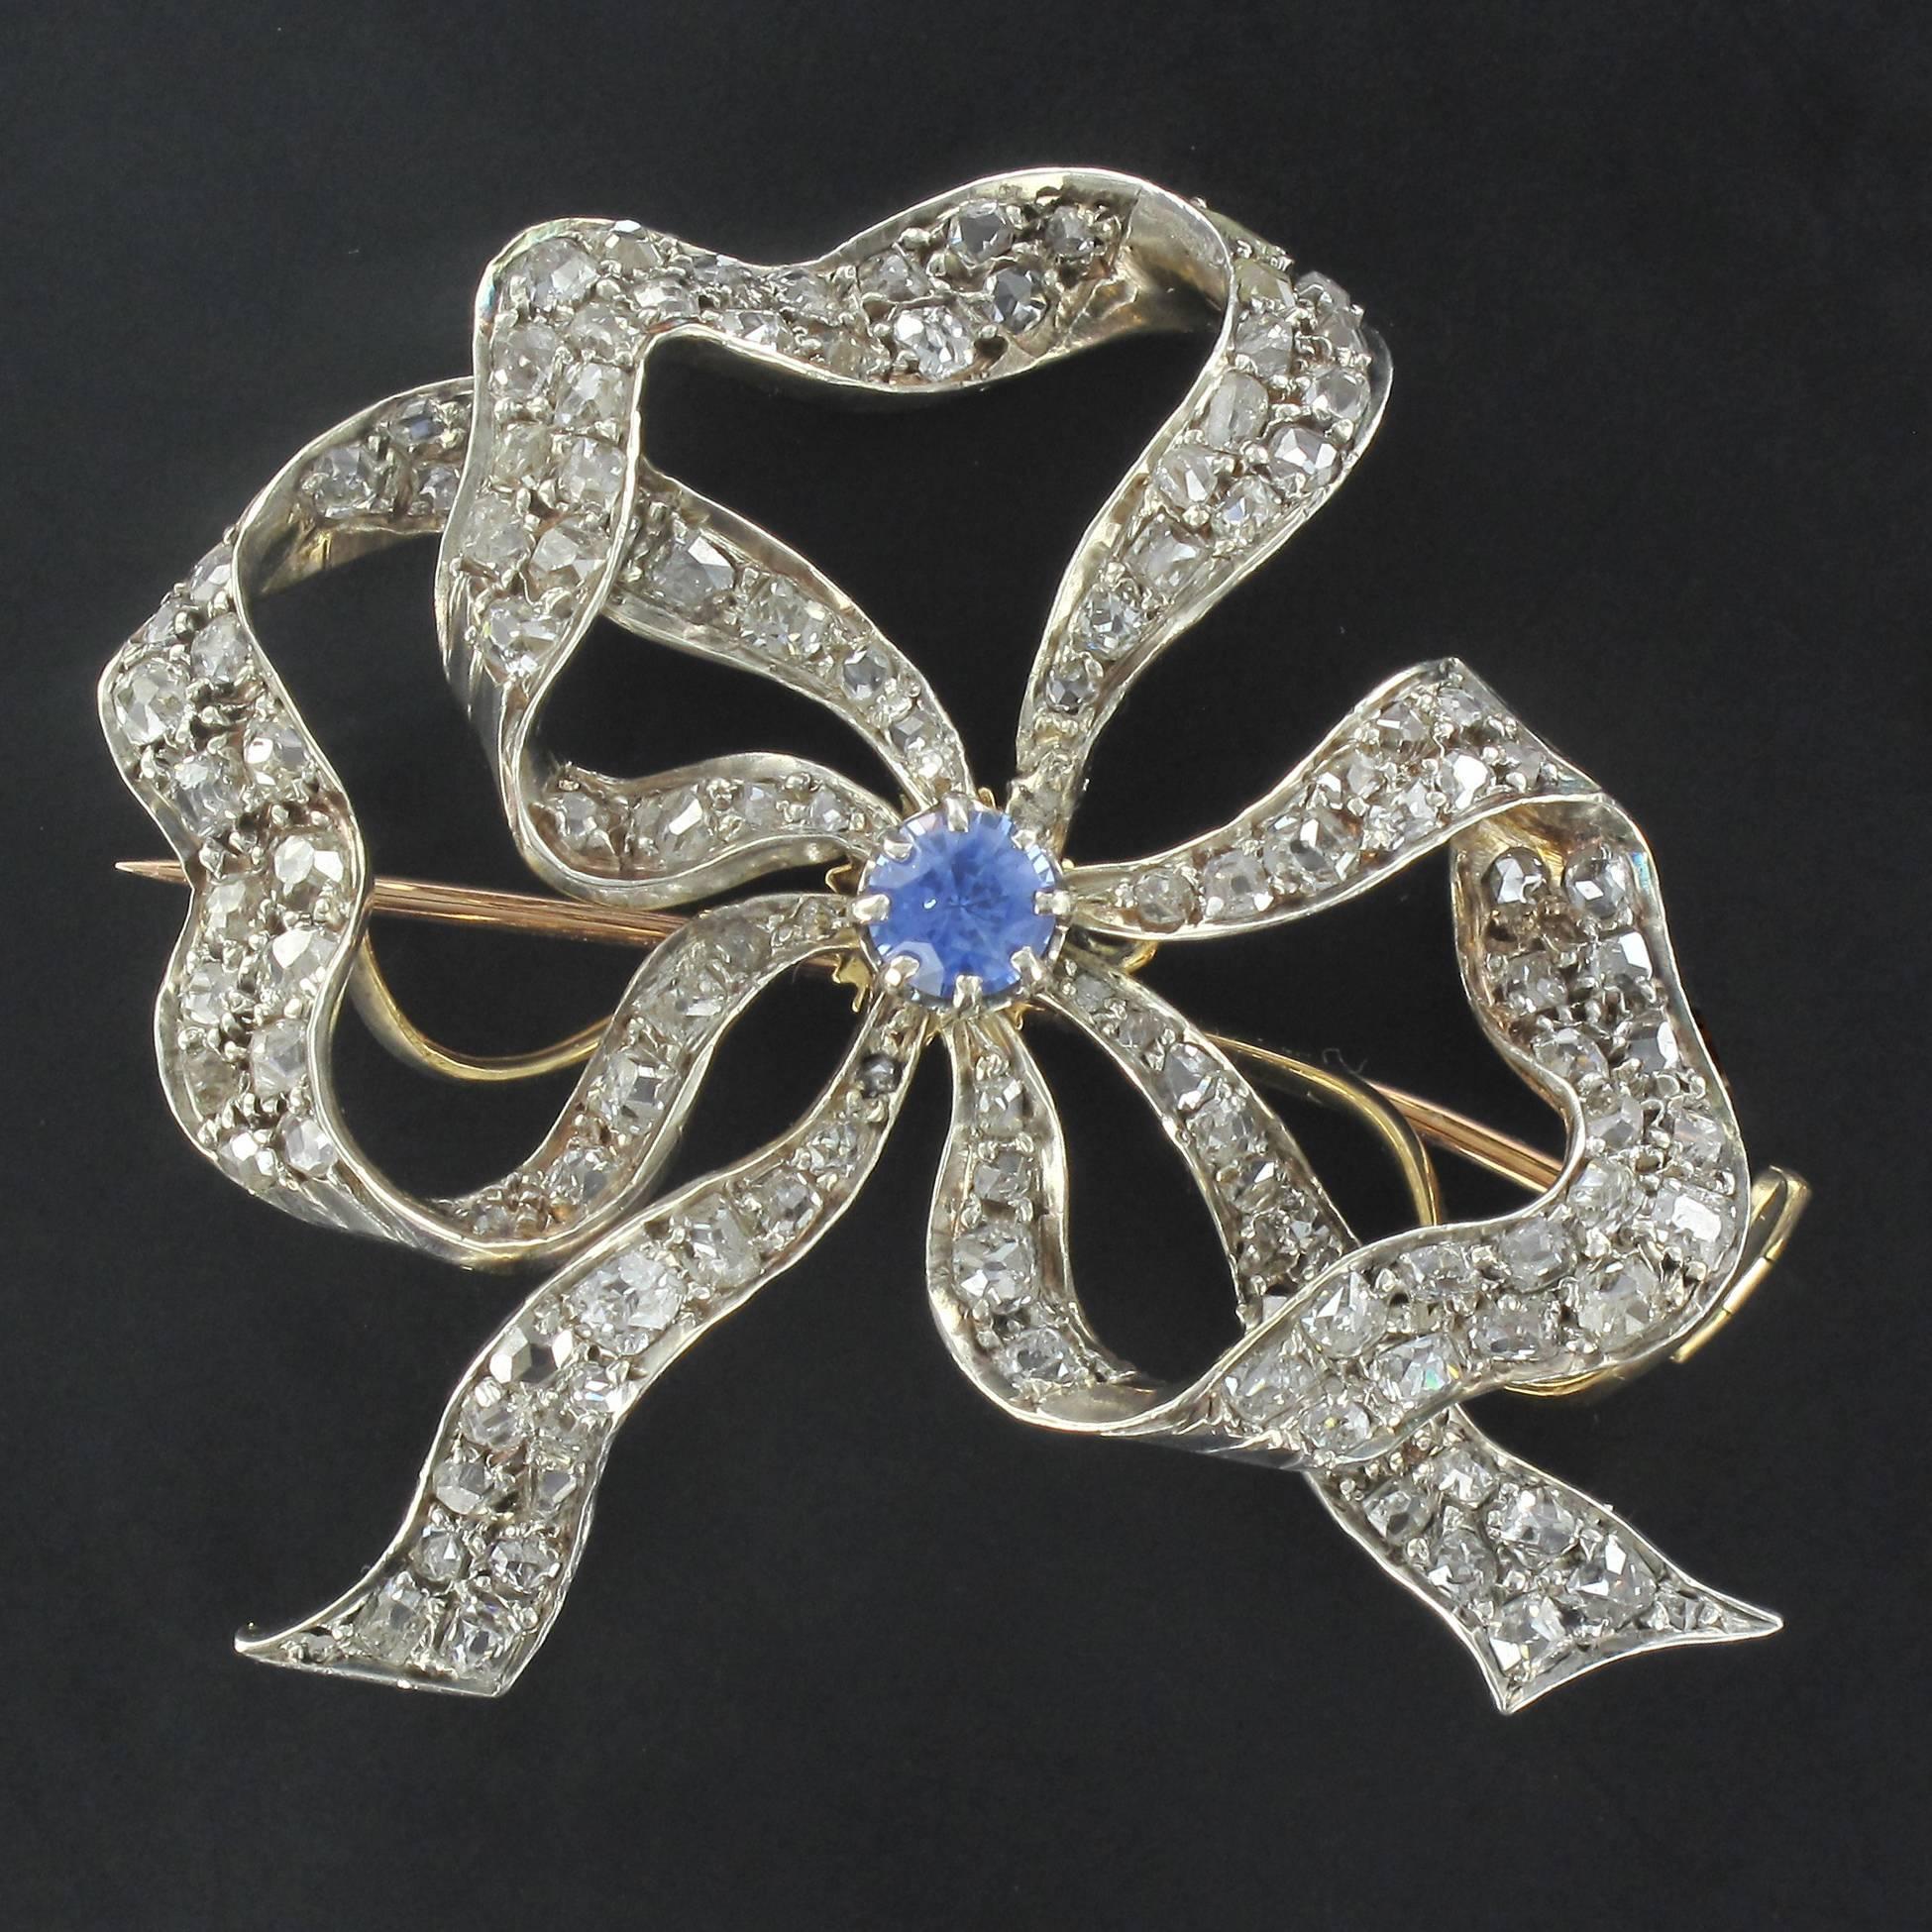 Pair of brooches in 18 carat yellow and pink gold and silver.

Each antique brooch is in the form of an openwork bow that is covered with rose cut diamonds and boasts a claw set round sapphire at the centre. The brooches each feature a pin clasp as